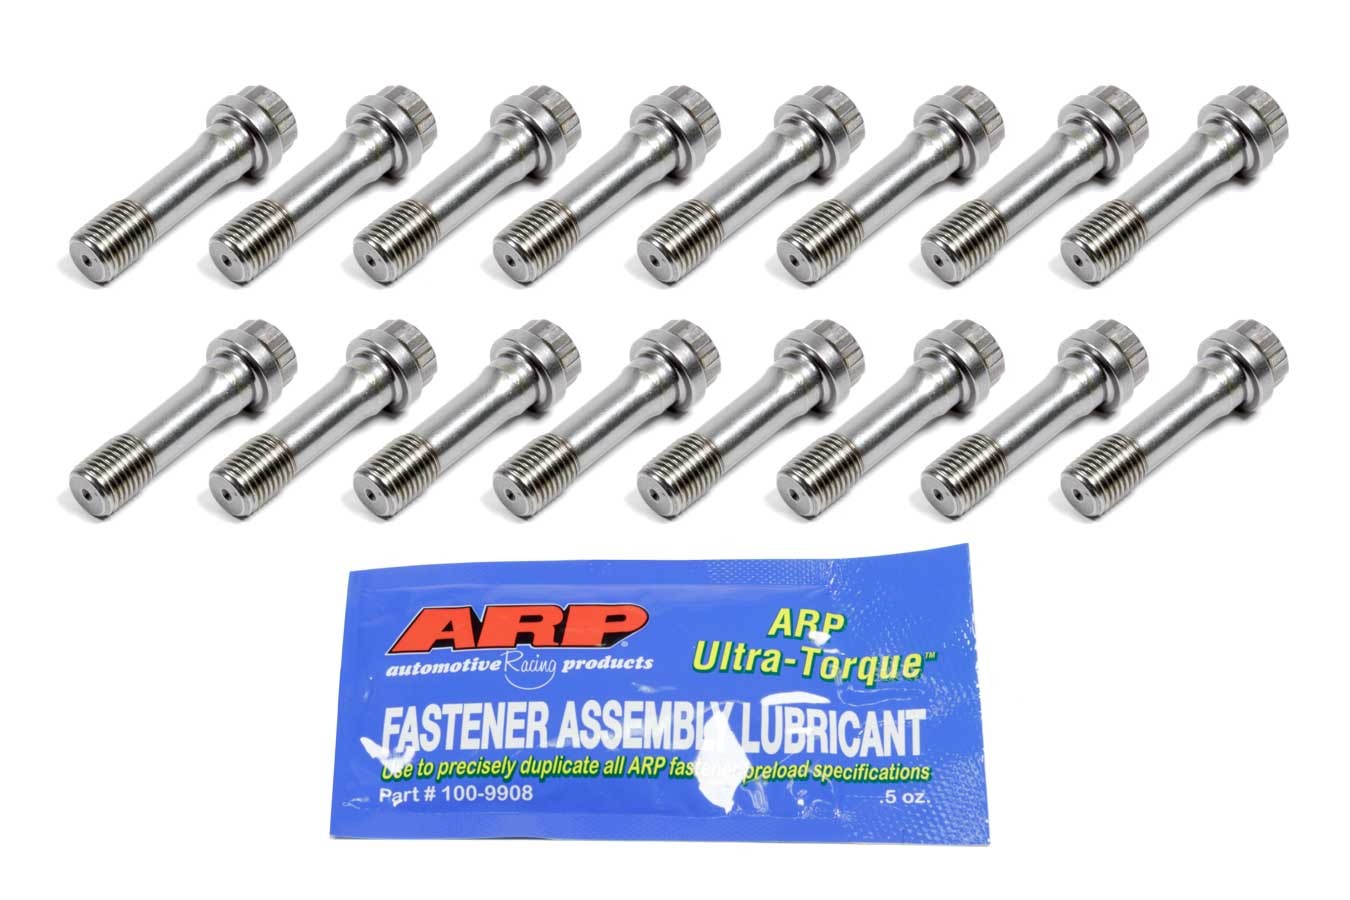 Eagle 14000 Connecting Rod Bolt Kit, 7/16 in Bolt, 1.600 in Long, 12 Point Head, ARPL19, Set of 16